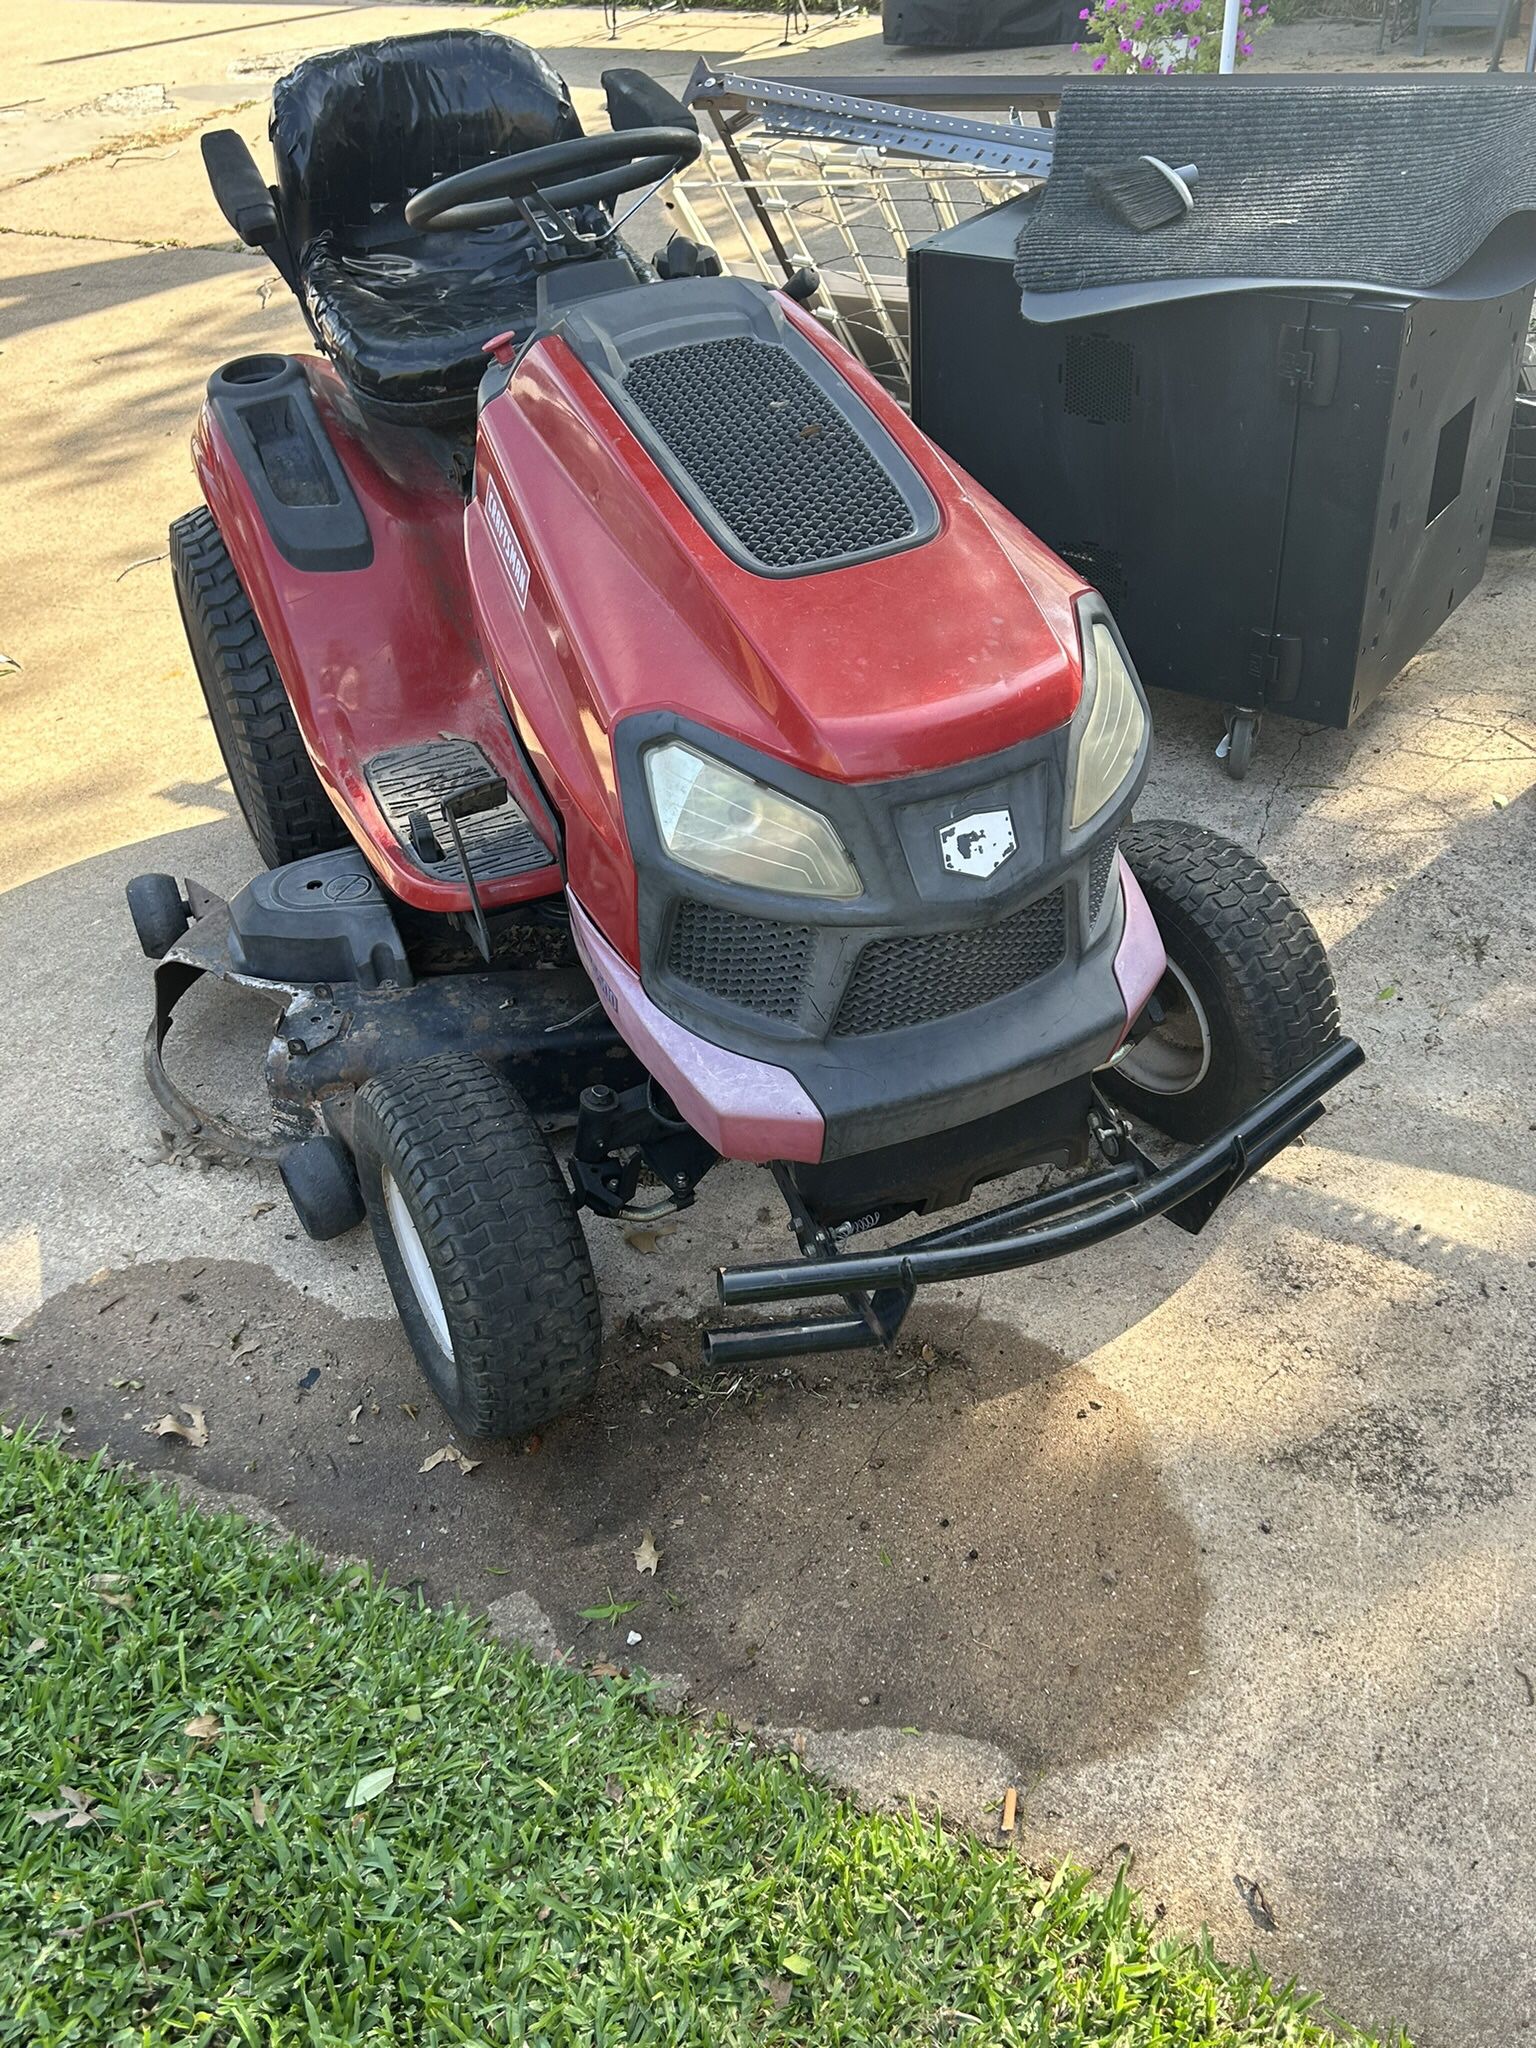 G 5500 Craftsman riding lawn mower tractor